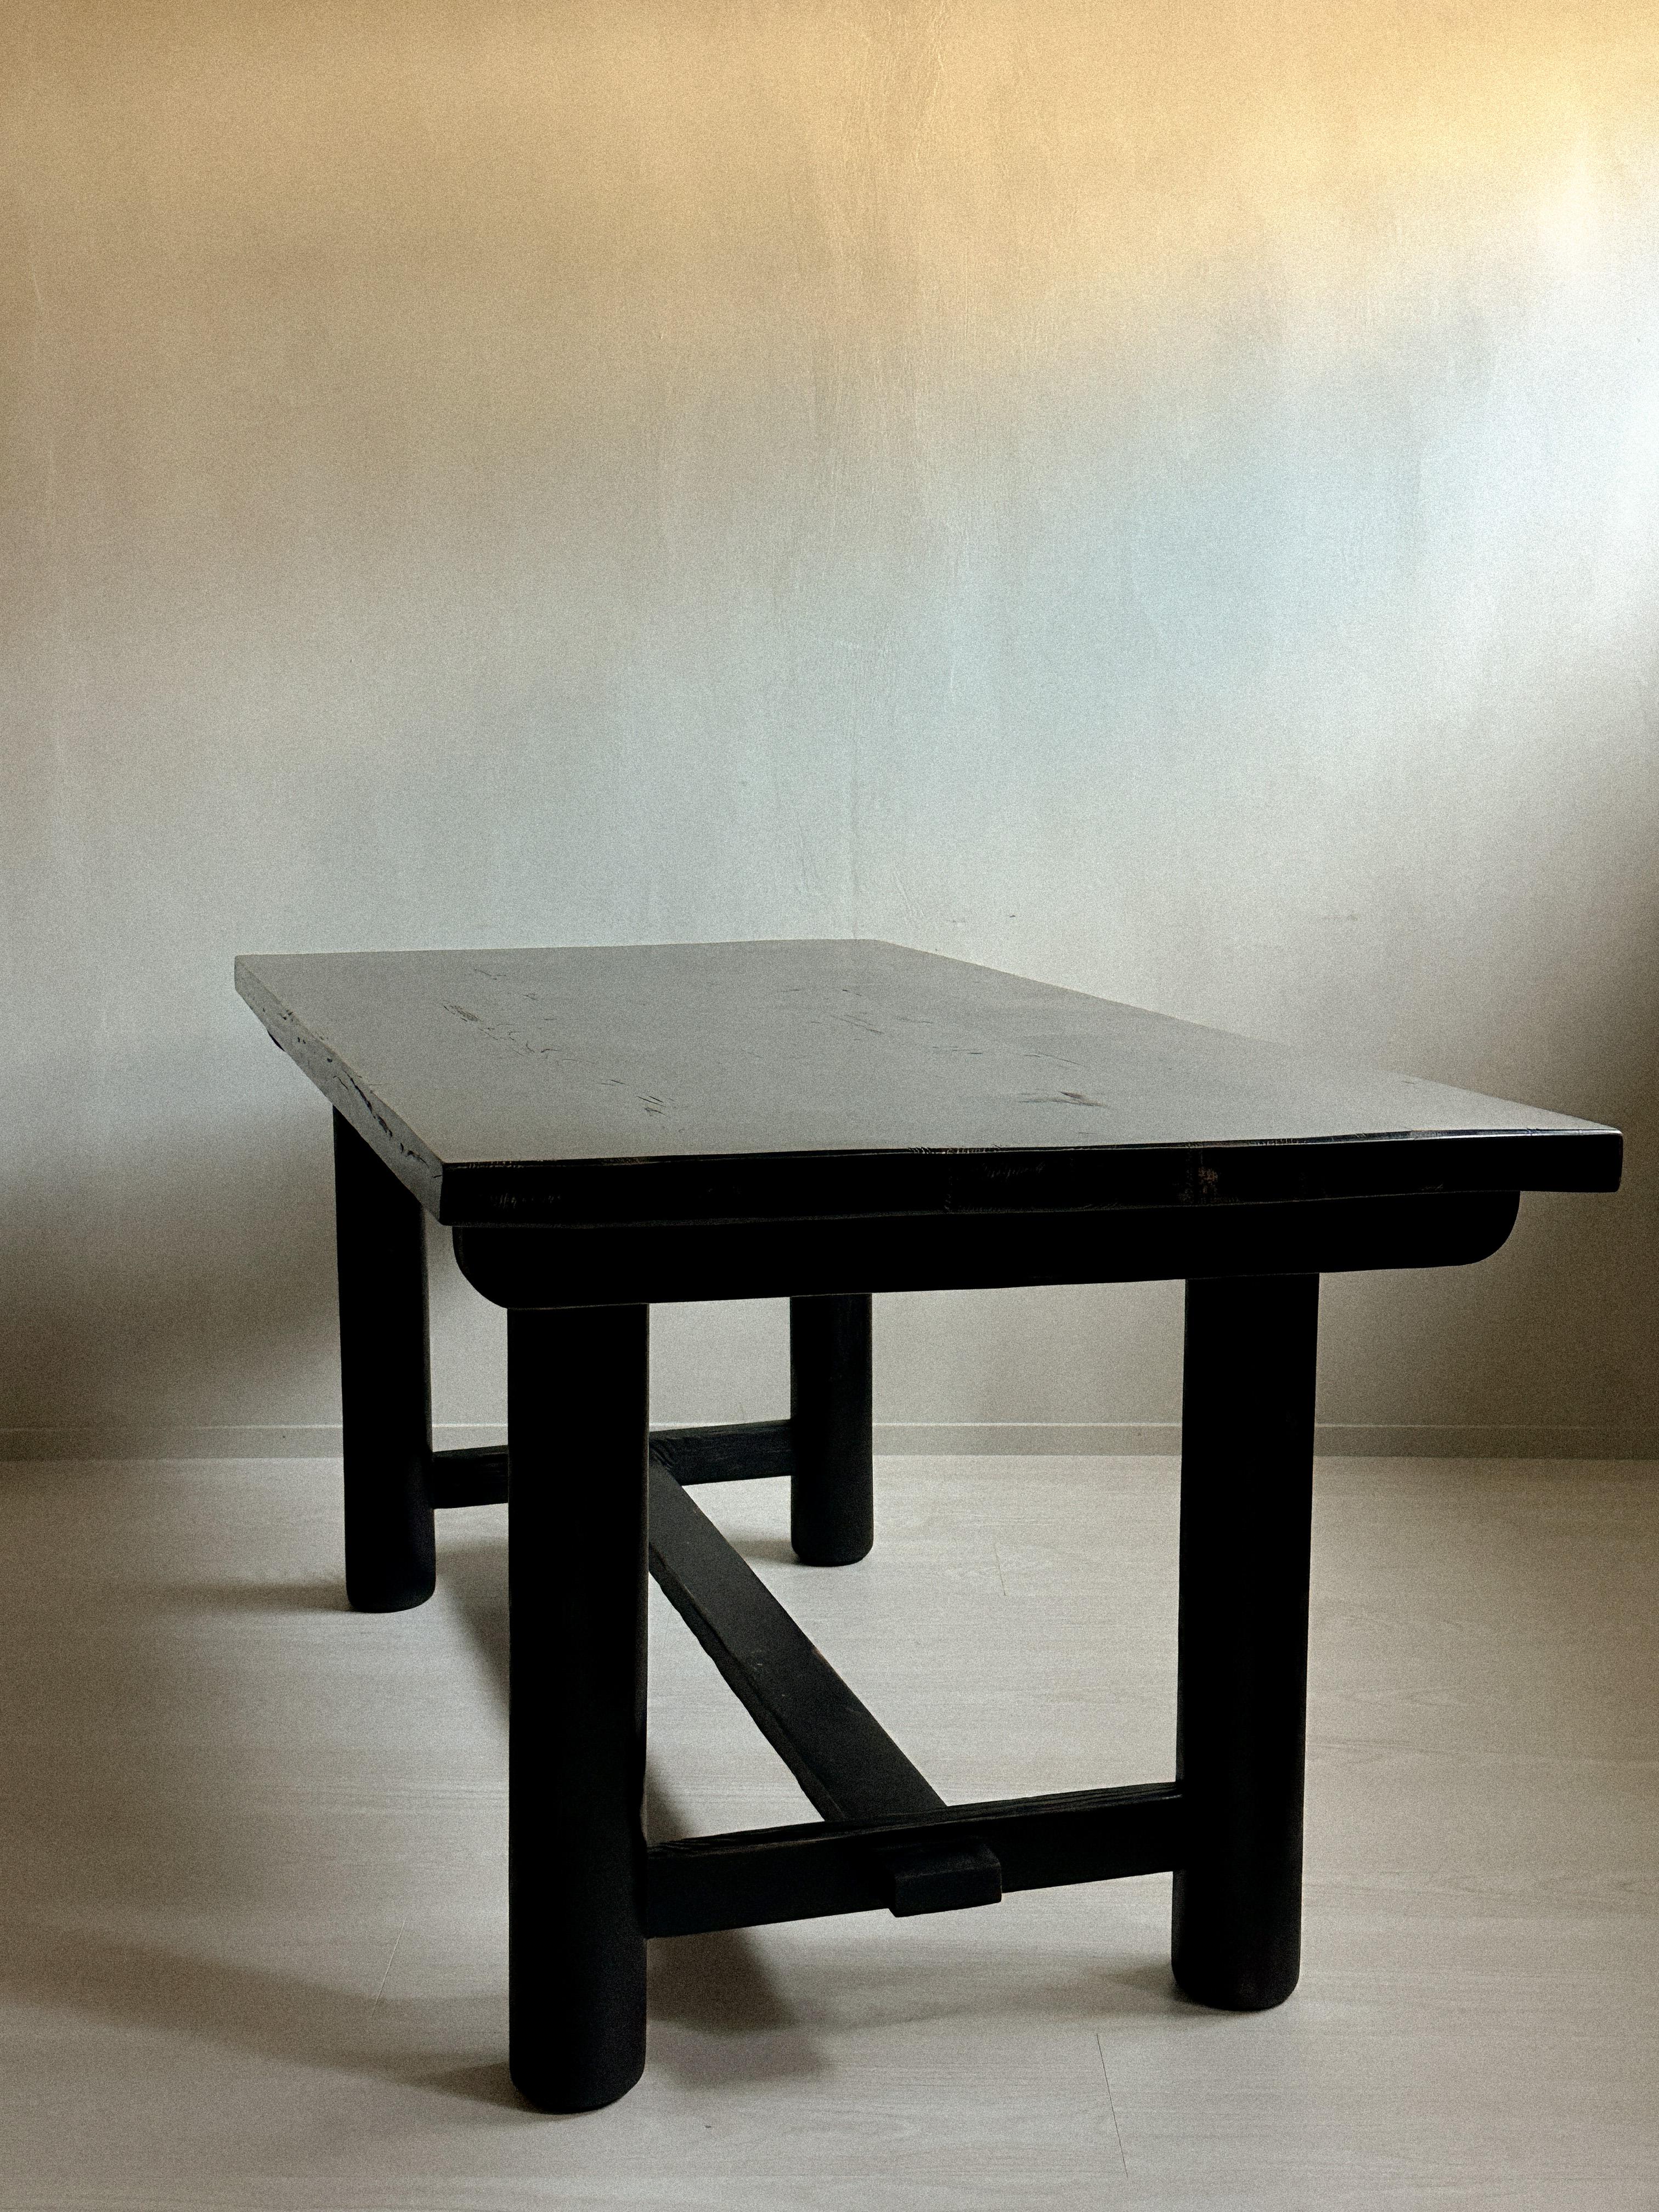 A beautiful and massive ebonzied dining table or desk from a family holiday-house built in 1959 in Les Allues, Meribel. Assumingly designed by Charlotte Perriand. Original dark stained pinewood with a wonderful patina. 

Wear consistent with age and